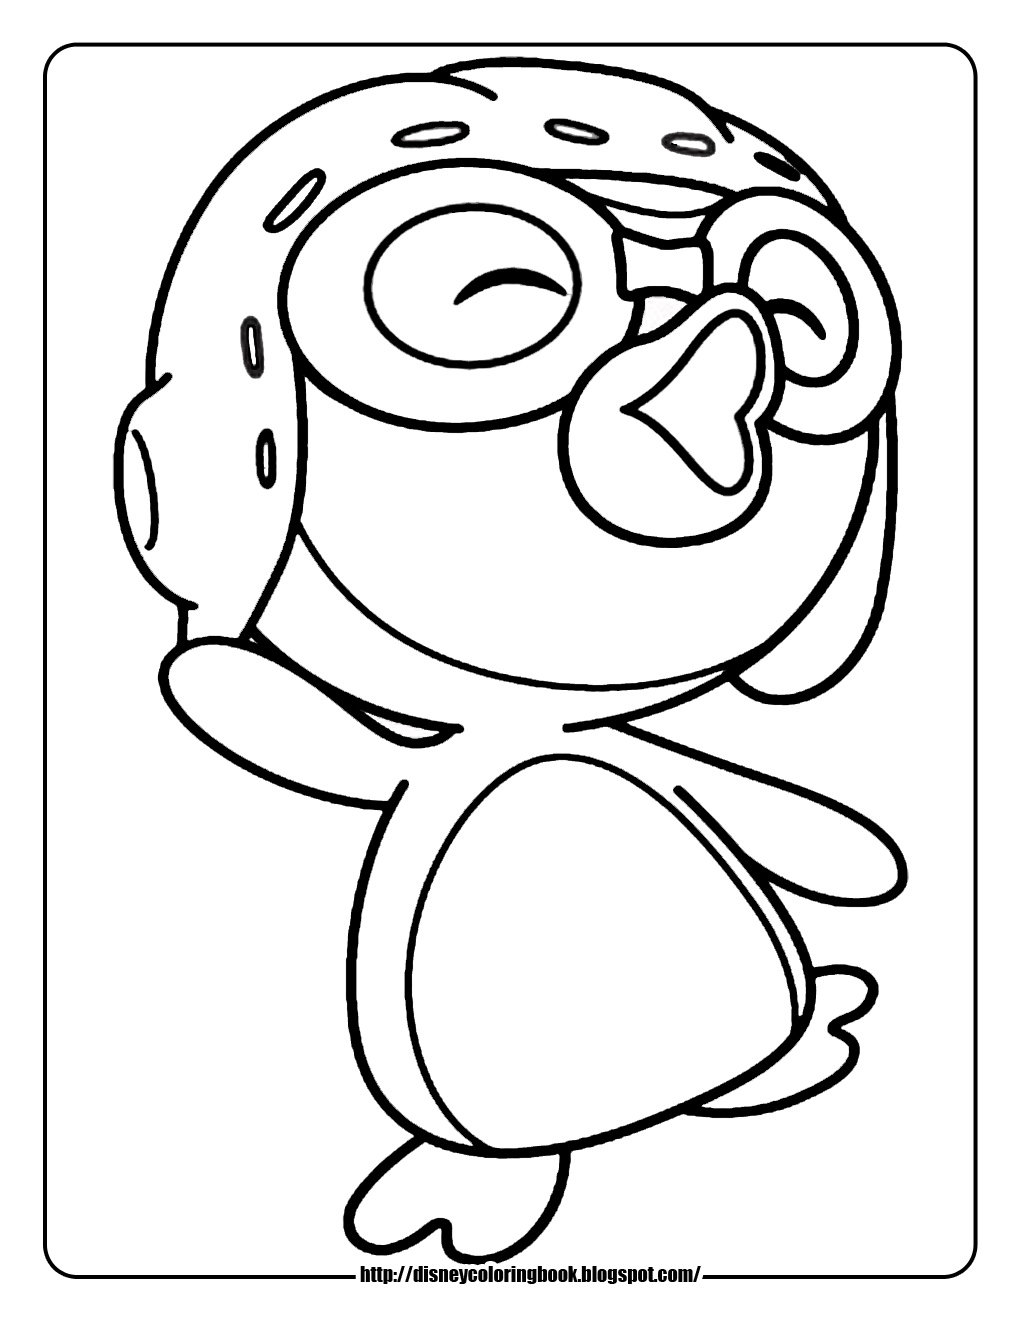 Penguin Coloring Pages 8